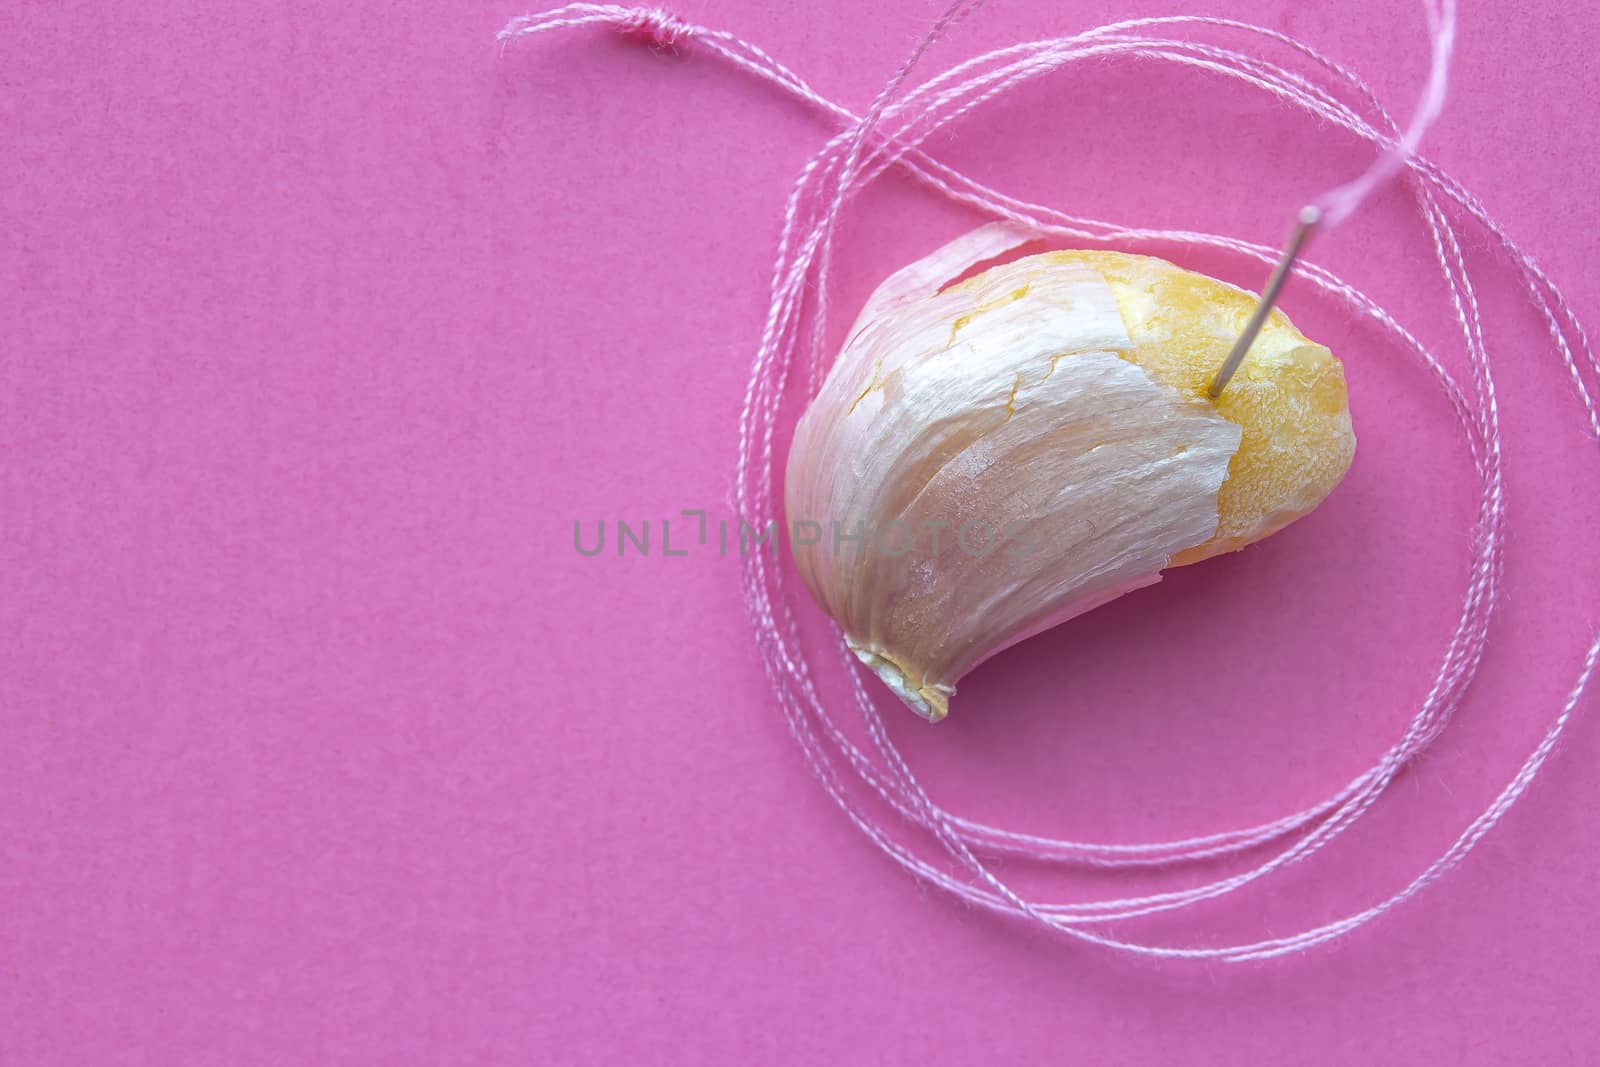 A single garlic with sewing needle and a pink Spool Of Pink Sewing Thread With Needle and pink background on the right side. by oasisamuel